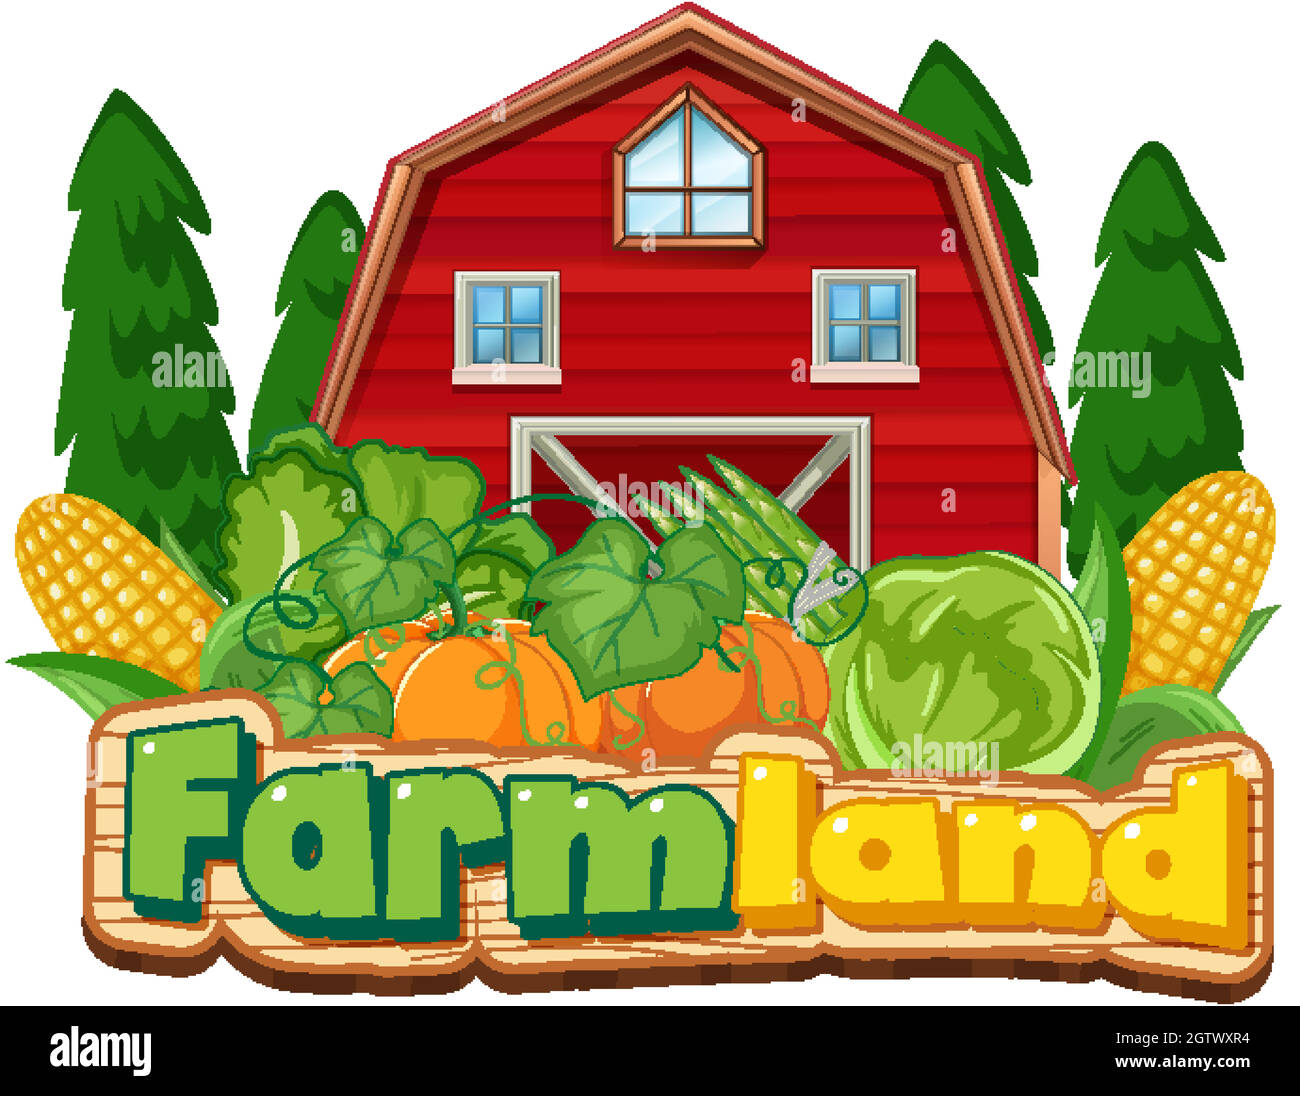 Farmland sign template with red barn and vegetables Stock Vector